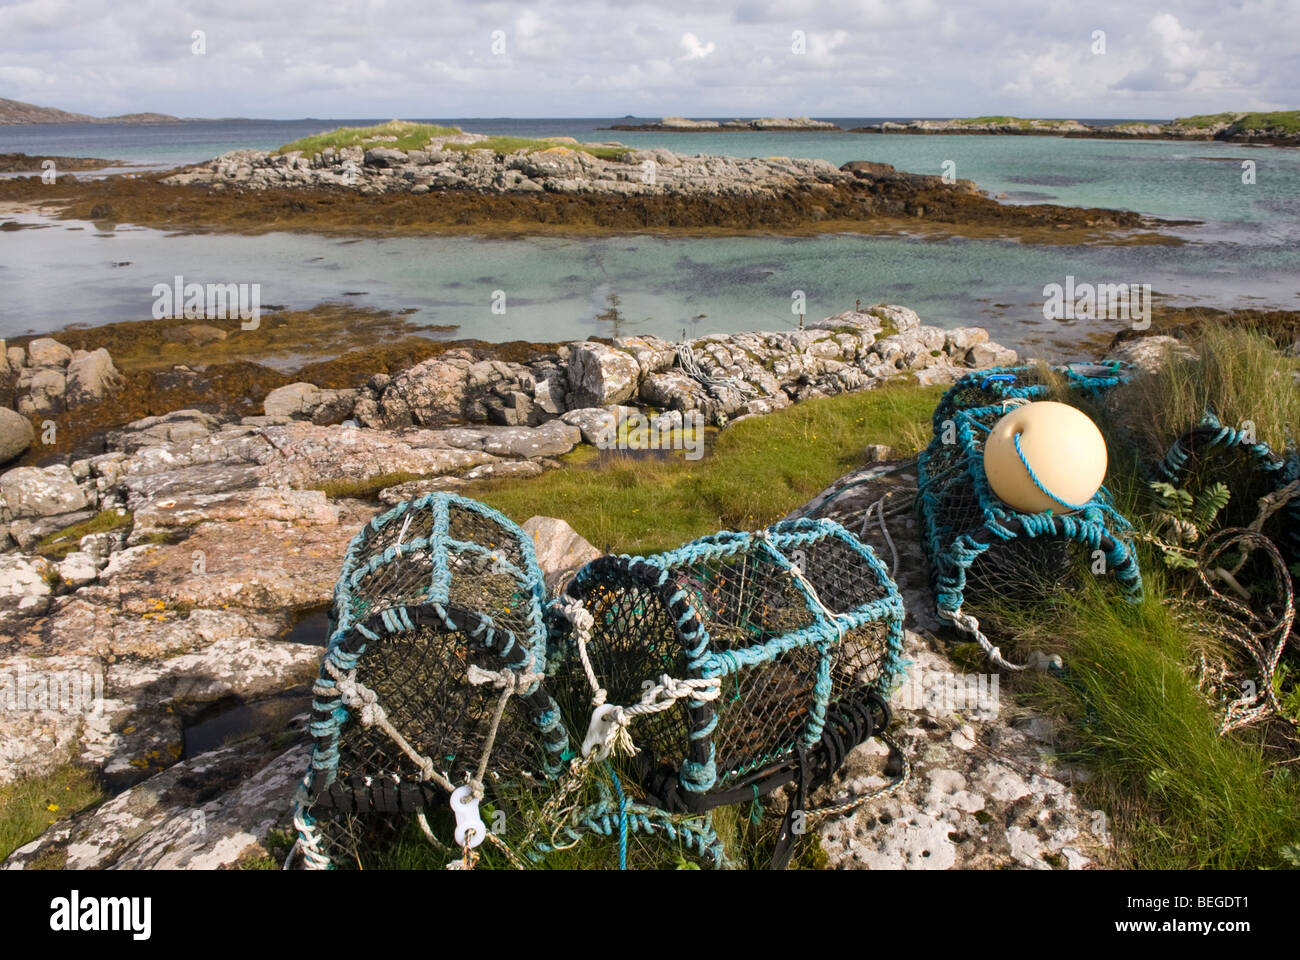 Lobster creels on the rocky coast at Earsairidh, the Isle of Barra, Outer Hebrides, Scotland. Stock Photo